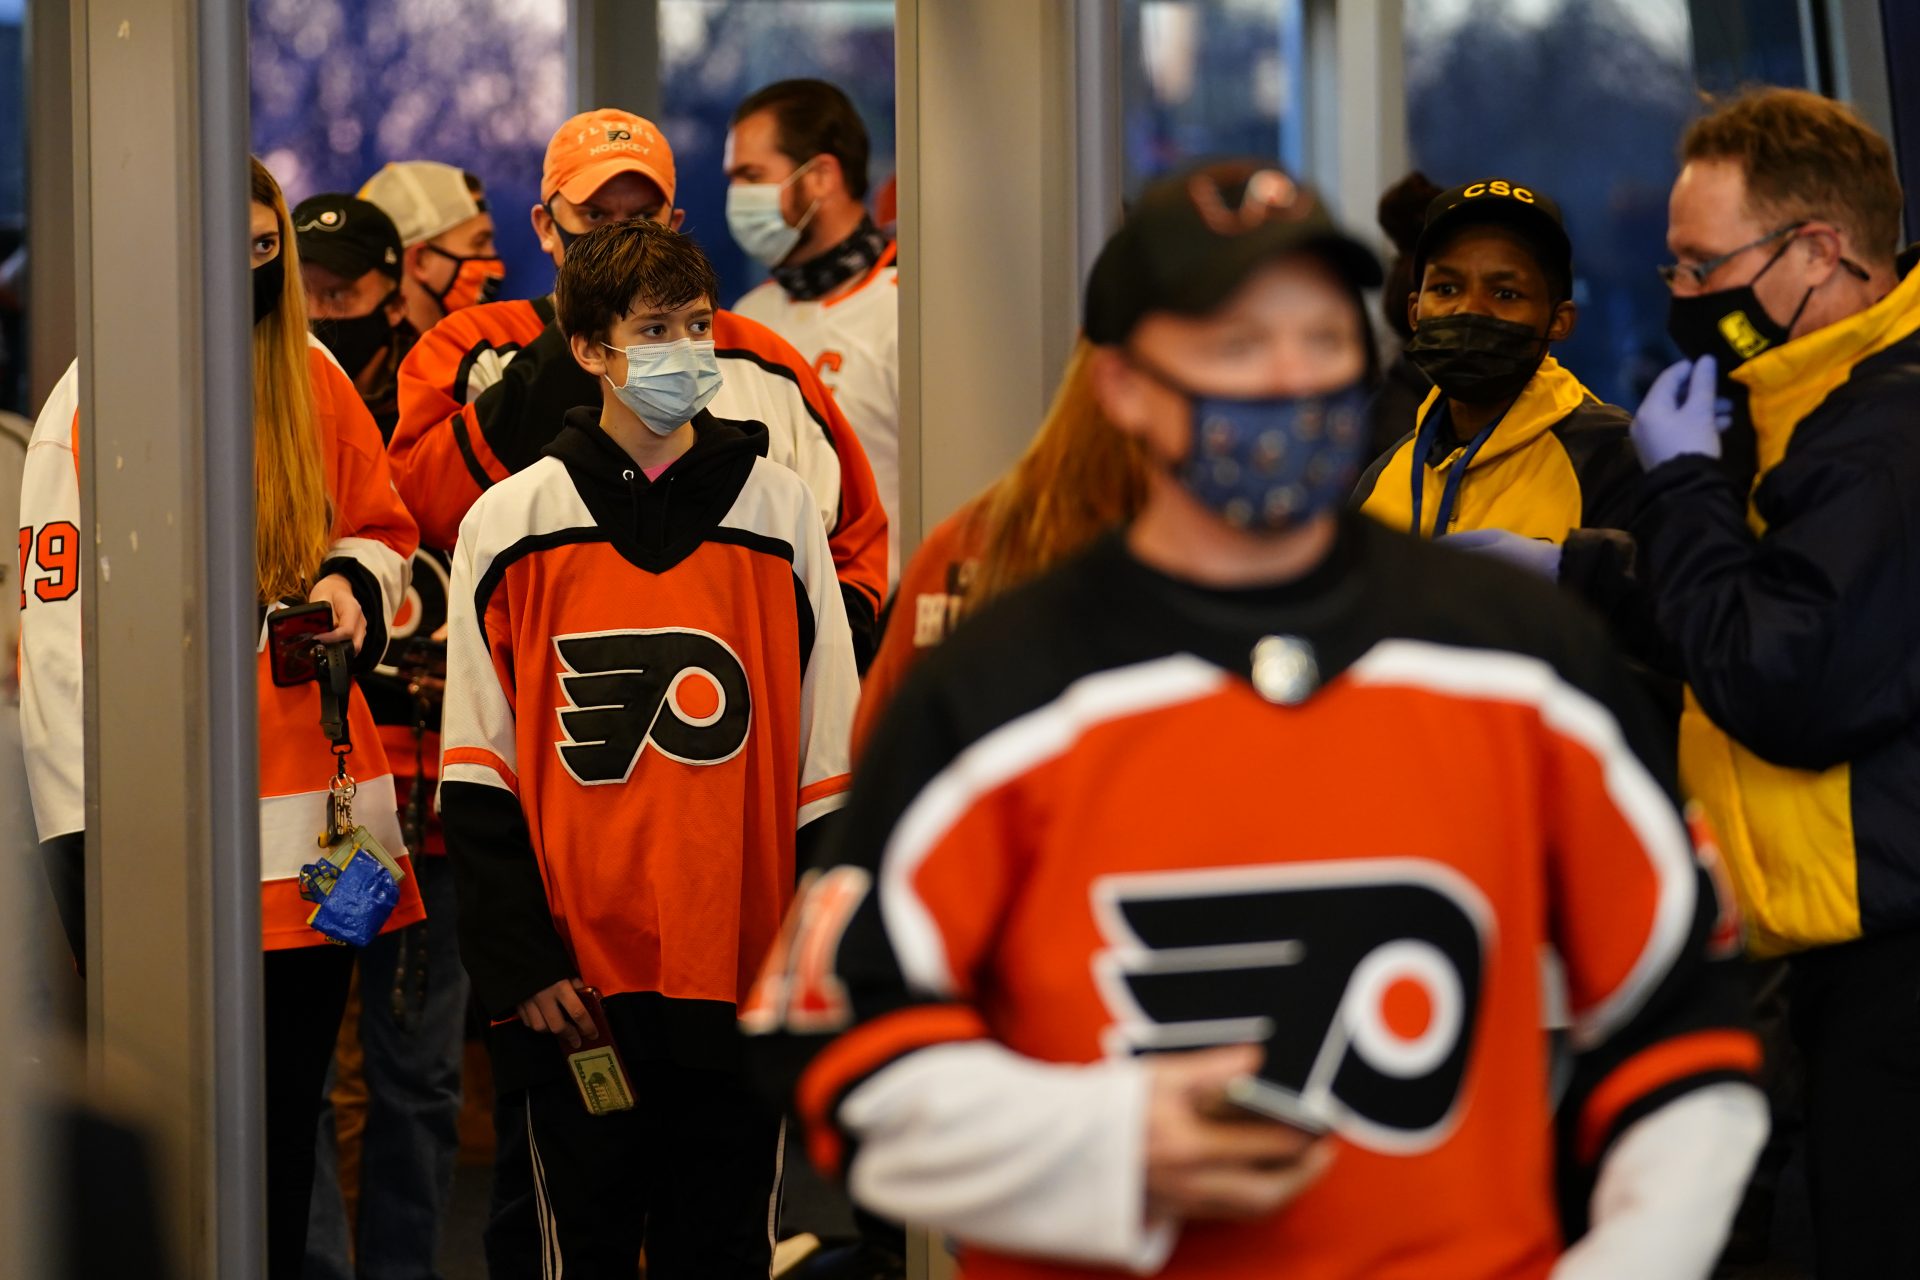 Fans walk through security at the Wells Fargo Center before an NHL hockey game between the Philadelphia Flyers and the Washington Capitals, Sunday, March 7, 2021, in Philadelphia.